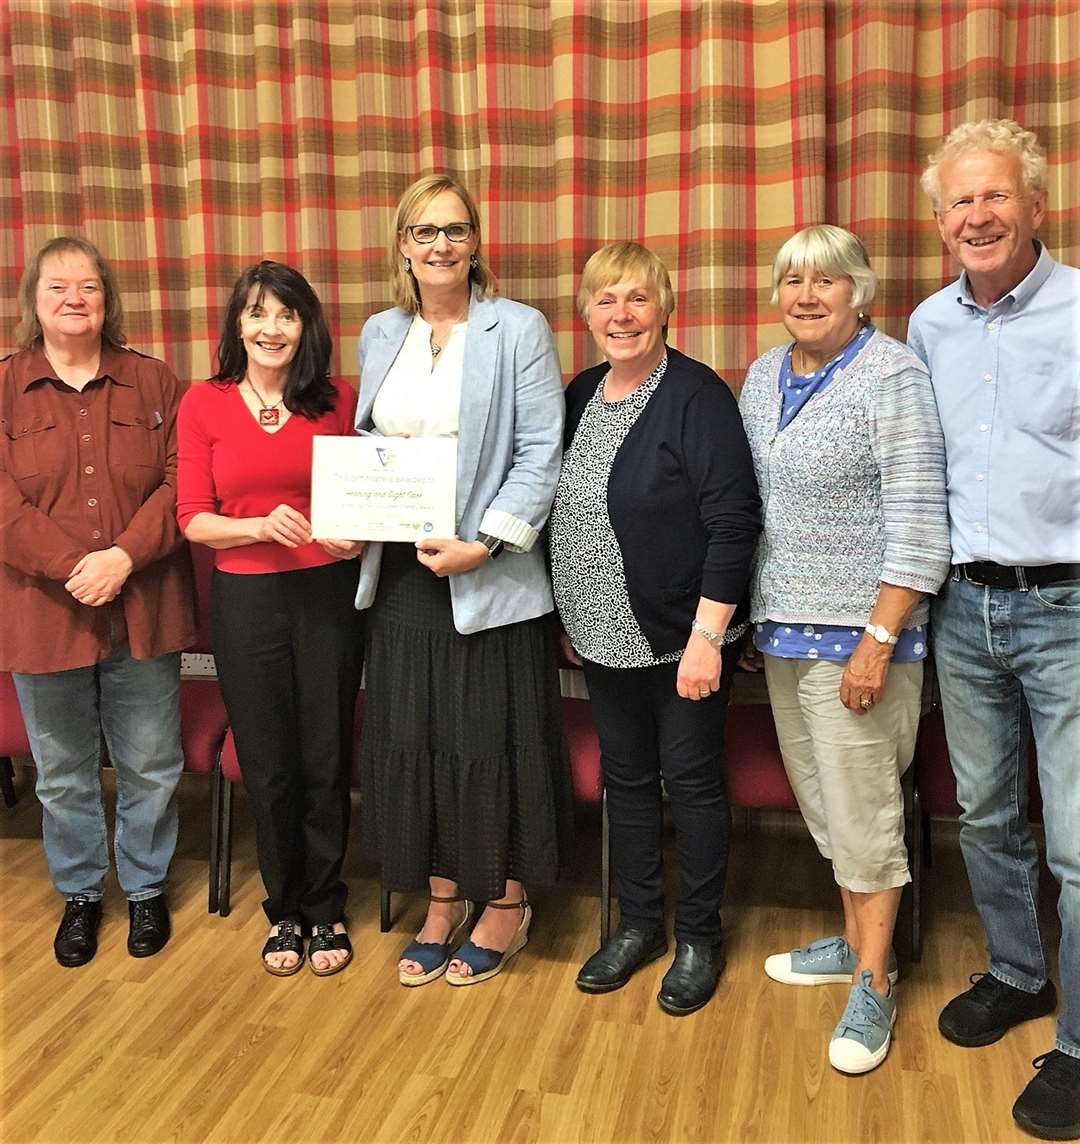 Deirdre Aitken, with some of the Hearing and Sight Care volunteers, receives the Volunteer Friendly Award from Catherine Patterson (in red top) of Caithness Voluntary Group.